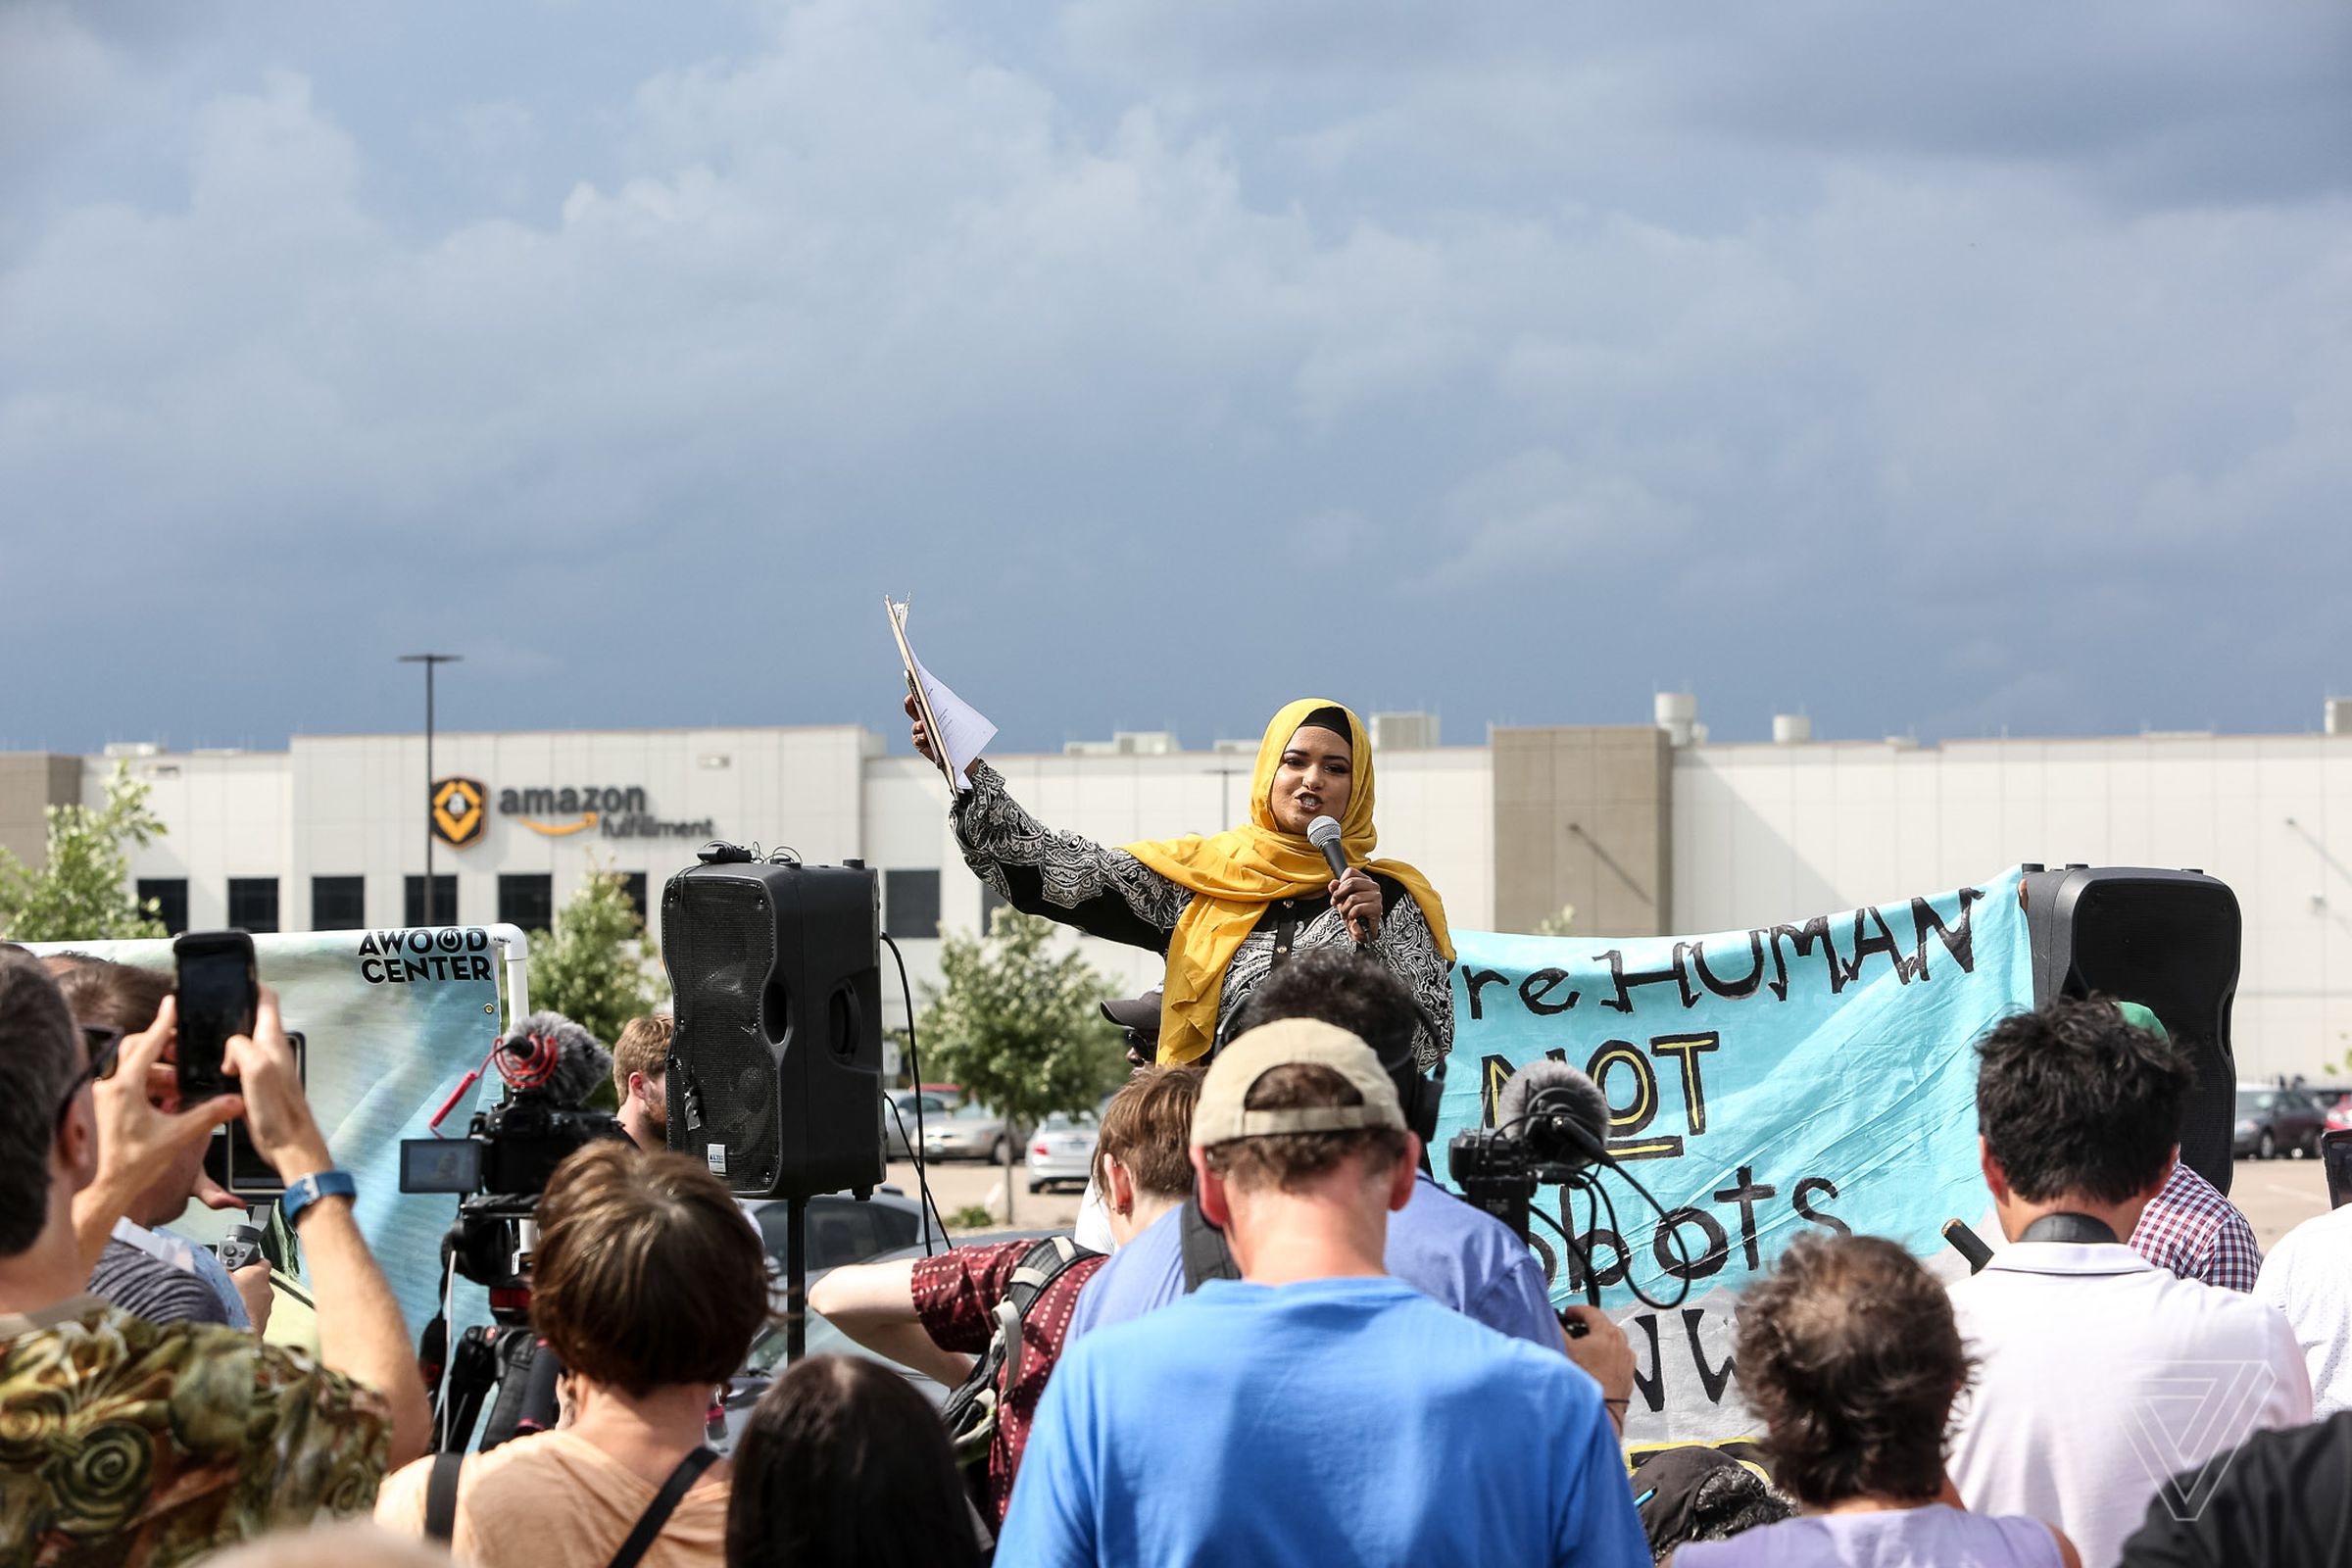 Sahro Sharif speaks during a rally and protest outside of the Amazon Fulfillment Center on Prime Day in Shakopee, Minn.